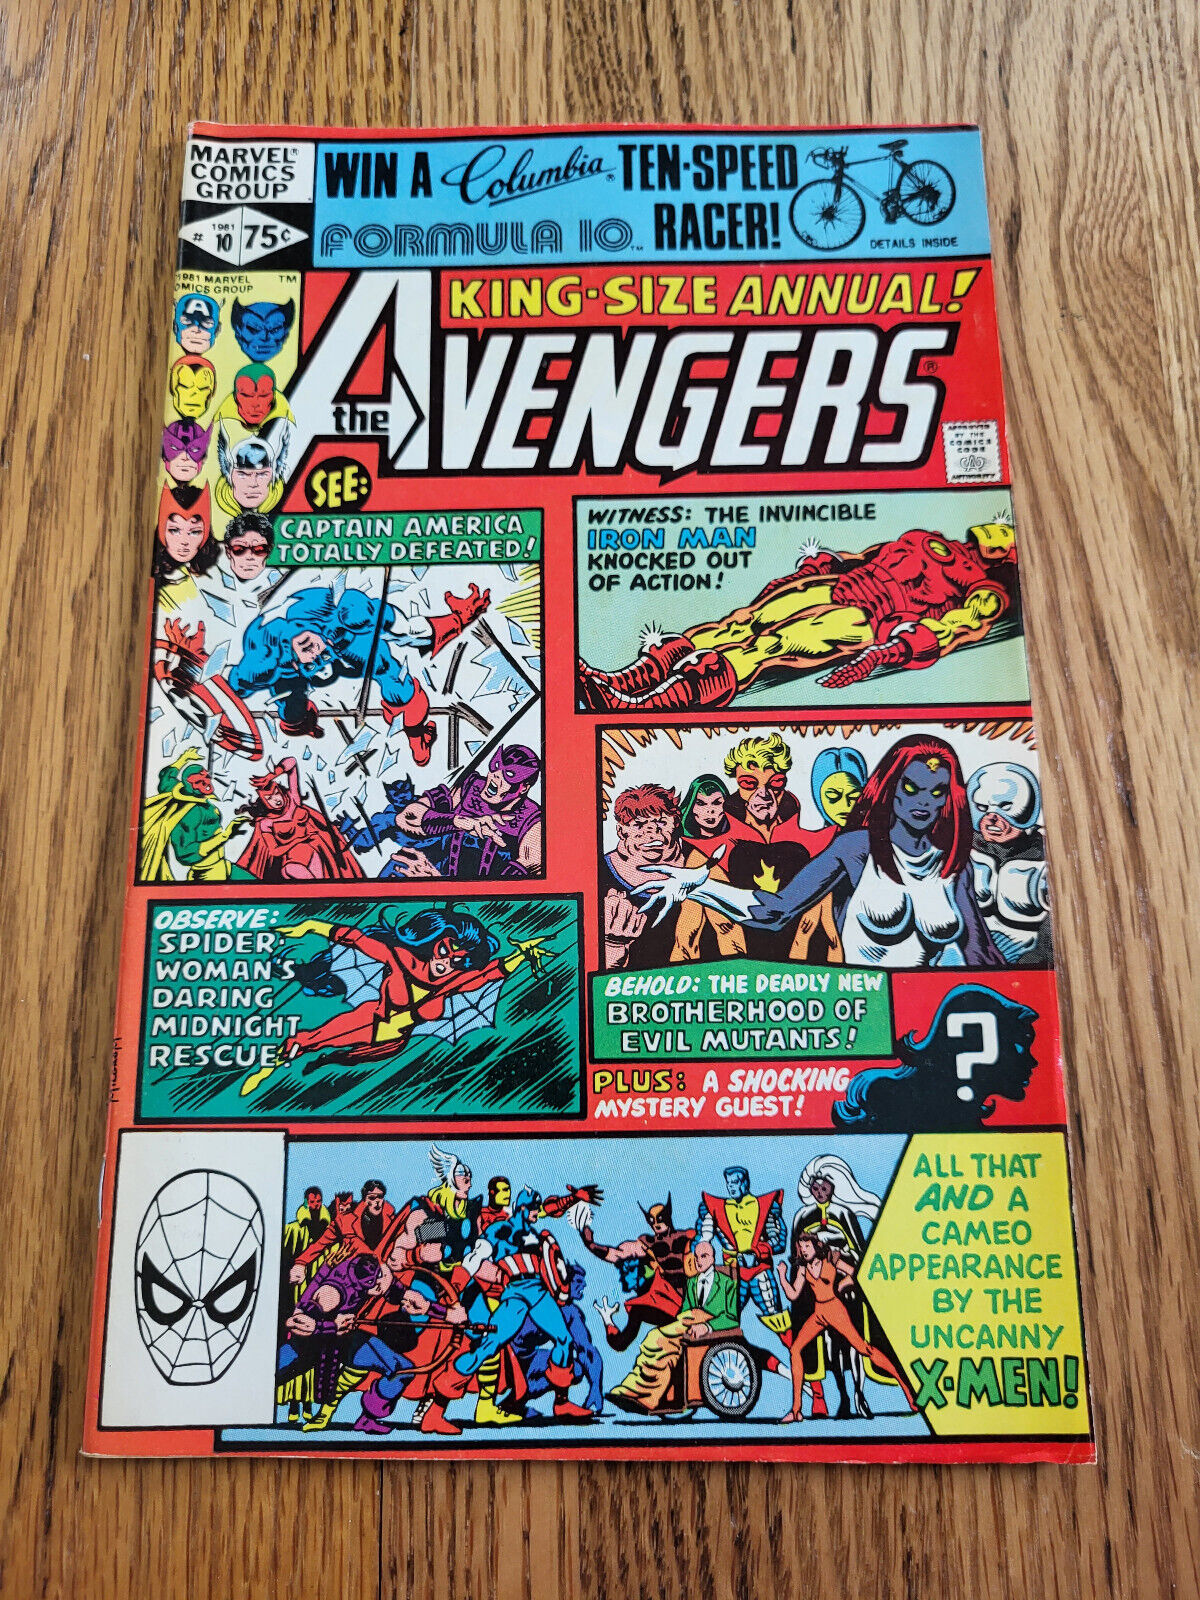 Marvel Comics The Avengers - King-Size Annual #10 (1981) - Excellent